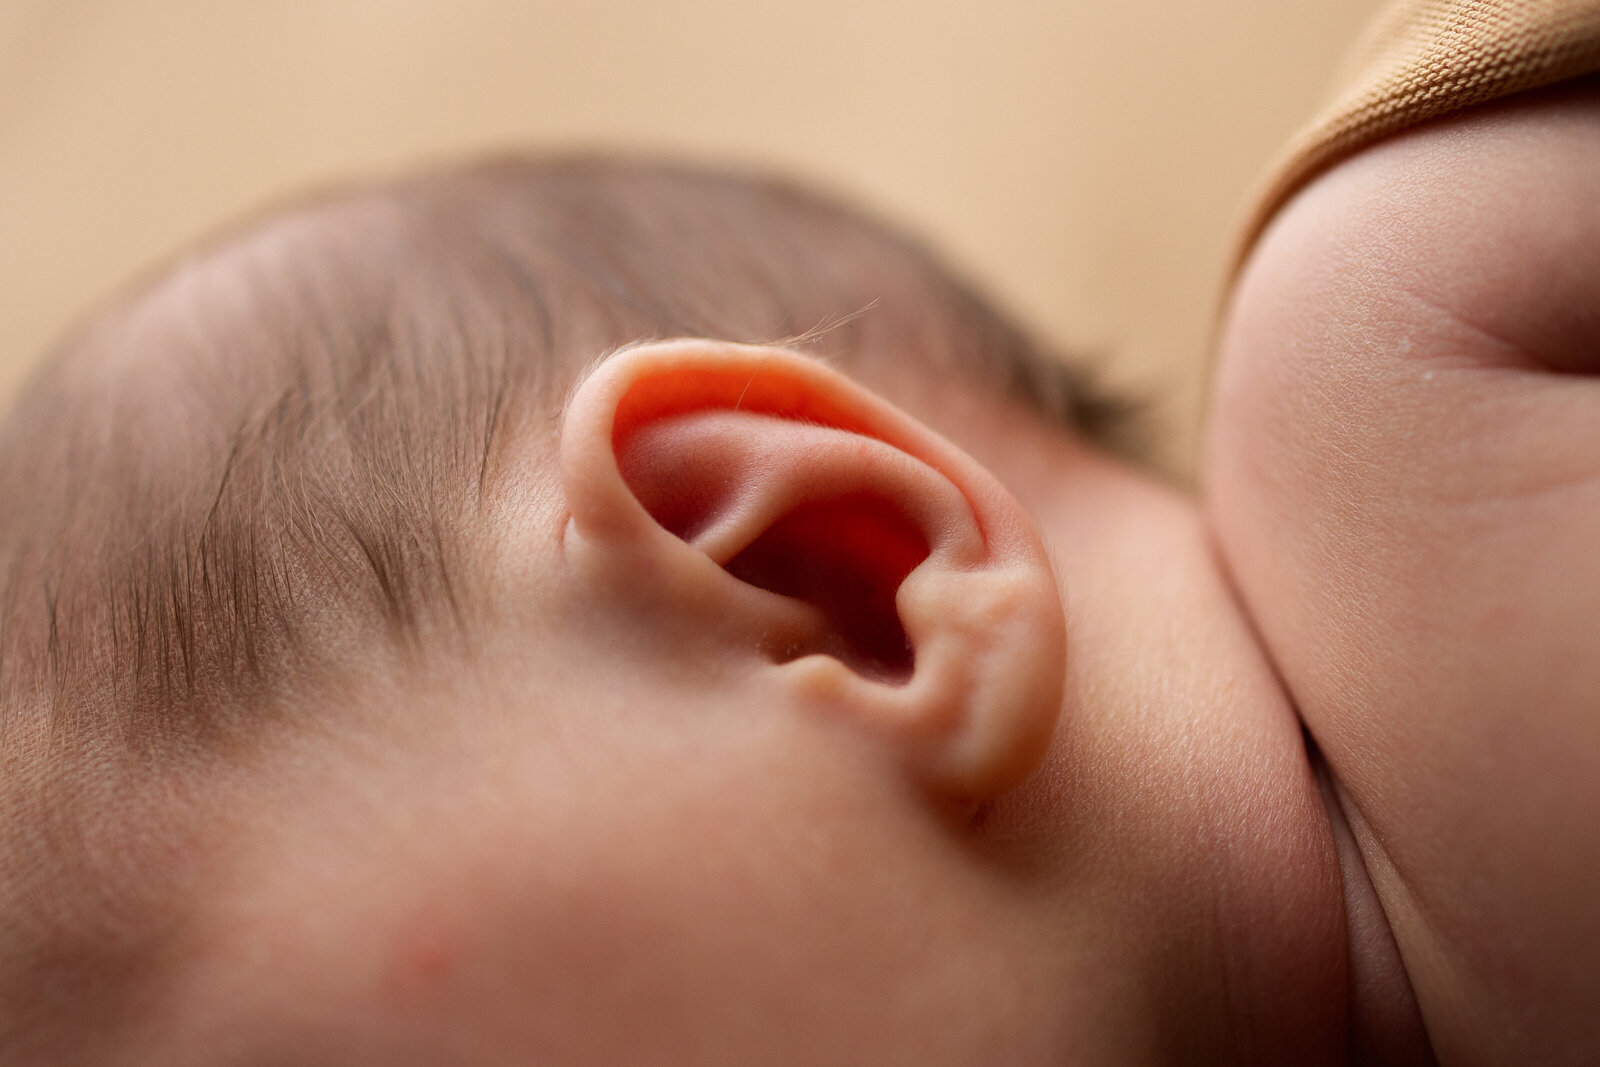 Close up detail photo of newborn baby's ear